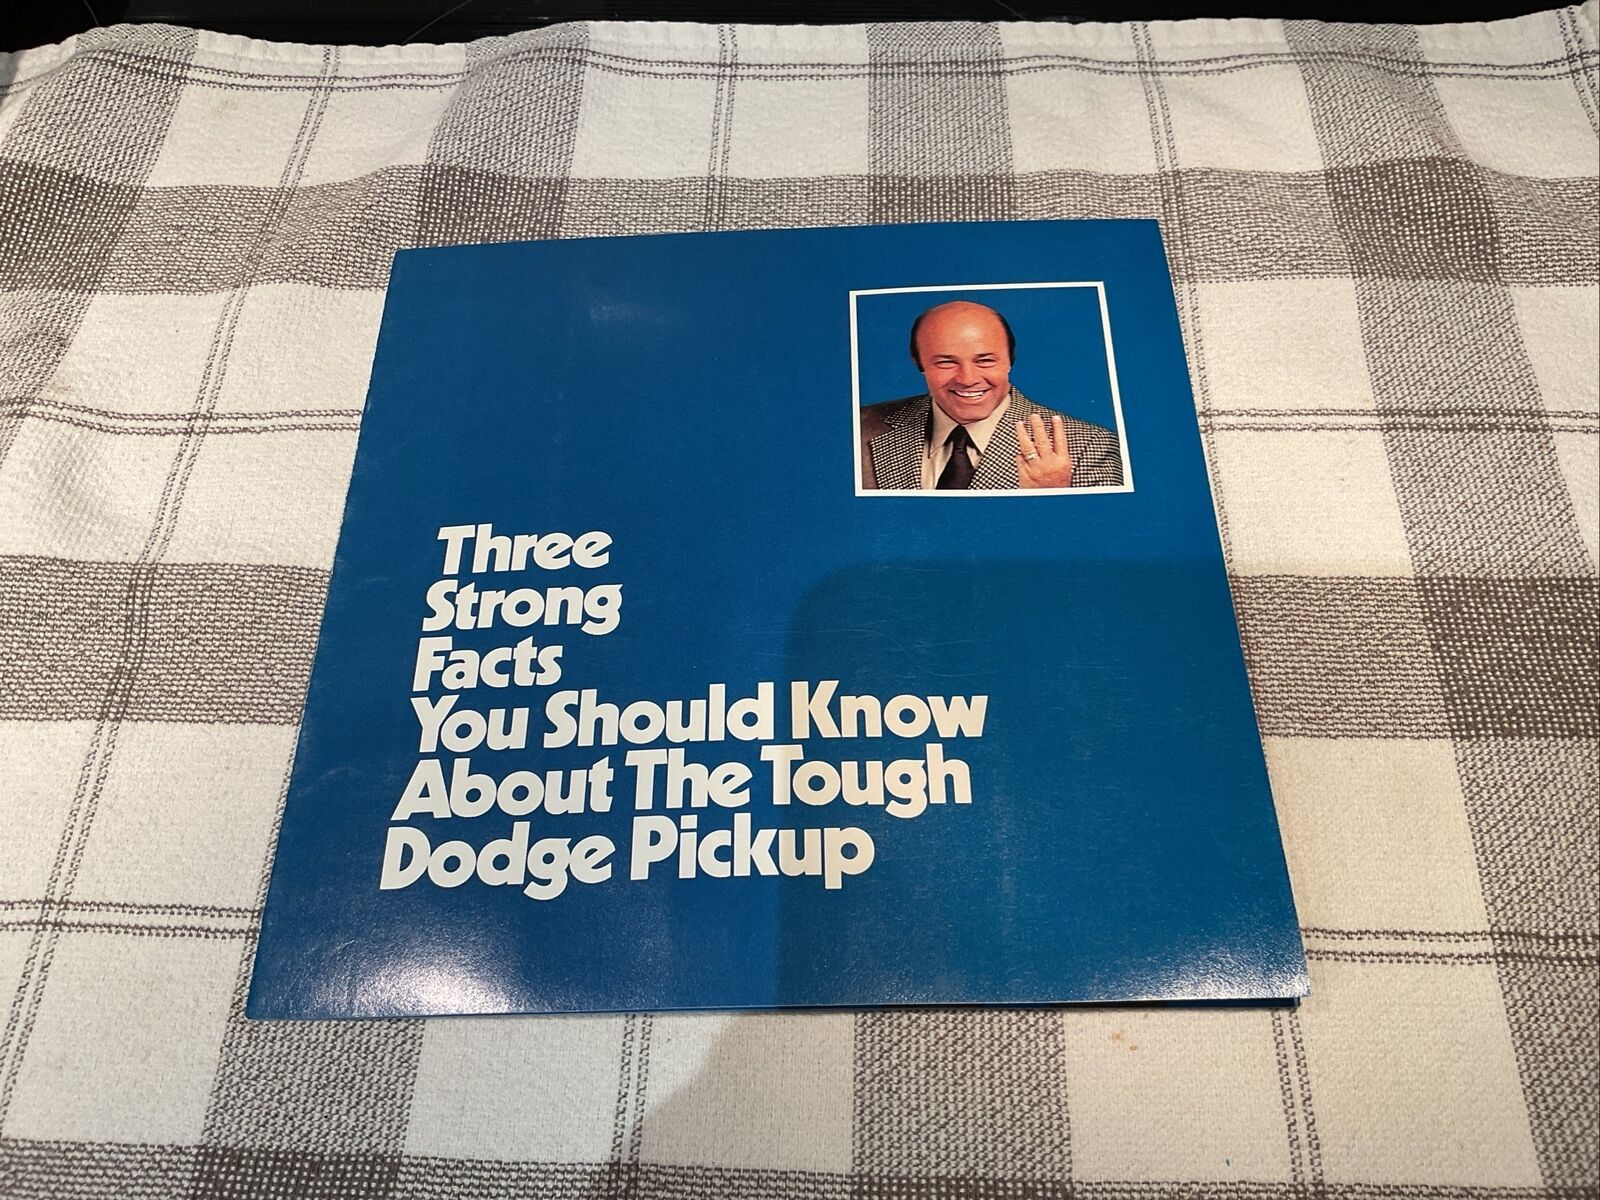 1976 Dodge pick up three strong facts brochure Mailer